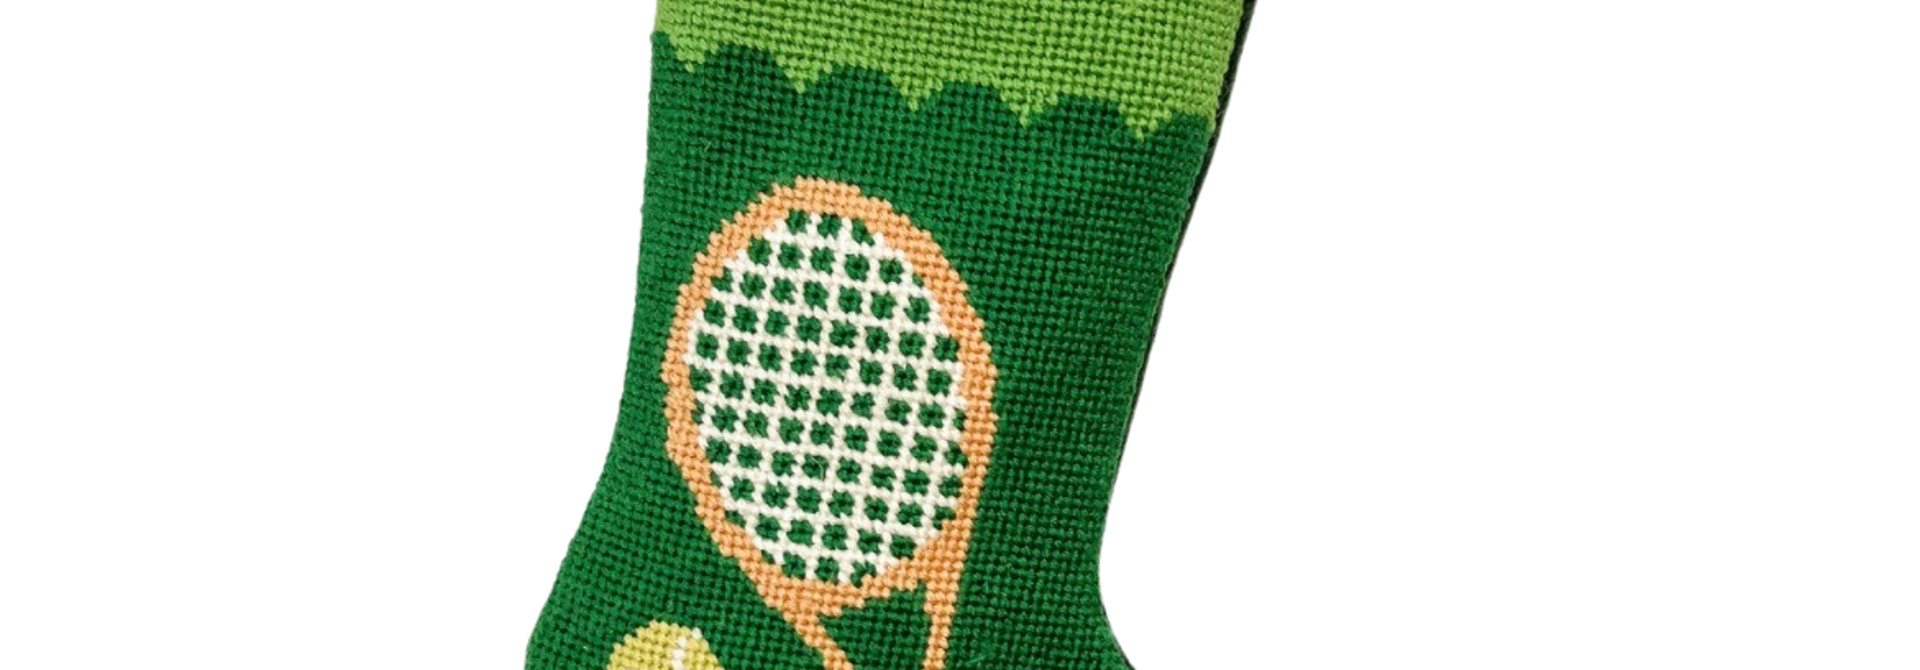 Grand Slam Tennis Raquets | The Bauble Stocking Collection, Green - 4.25 Inch x 6 Inch